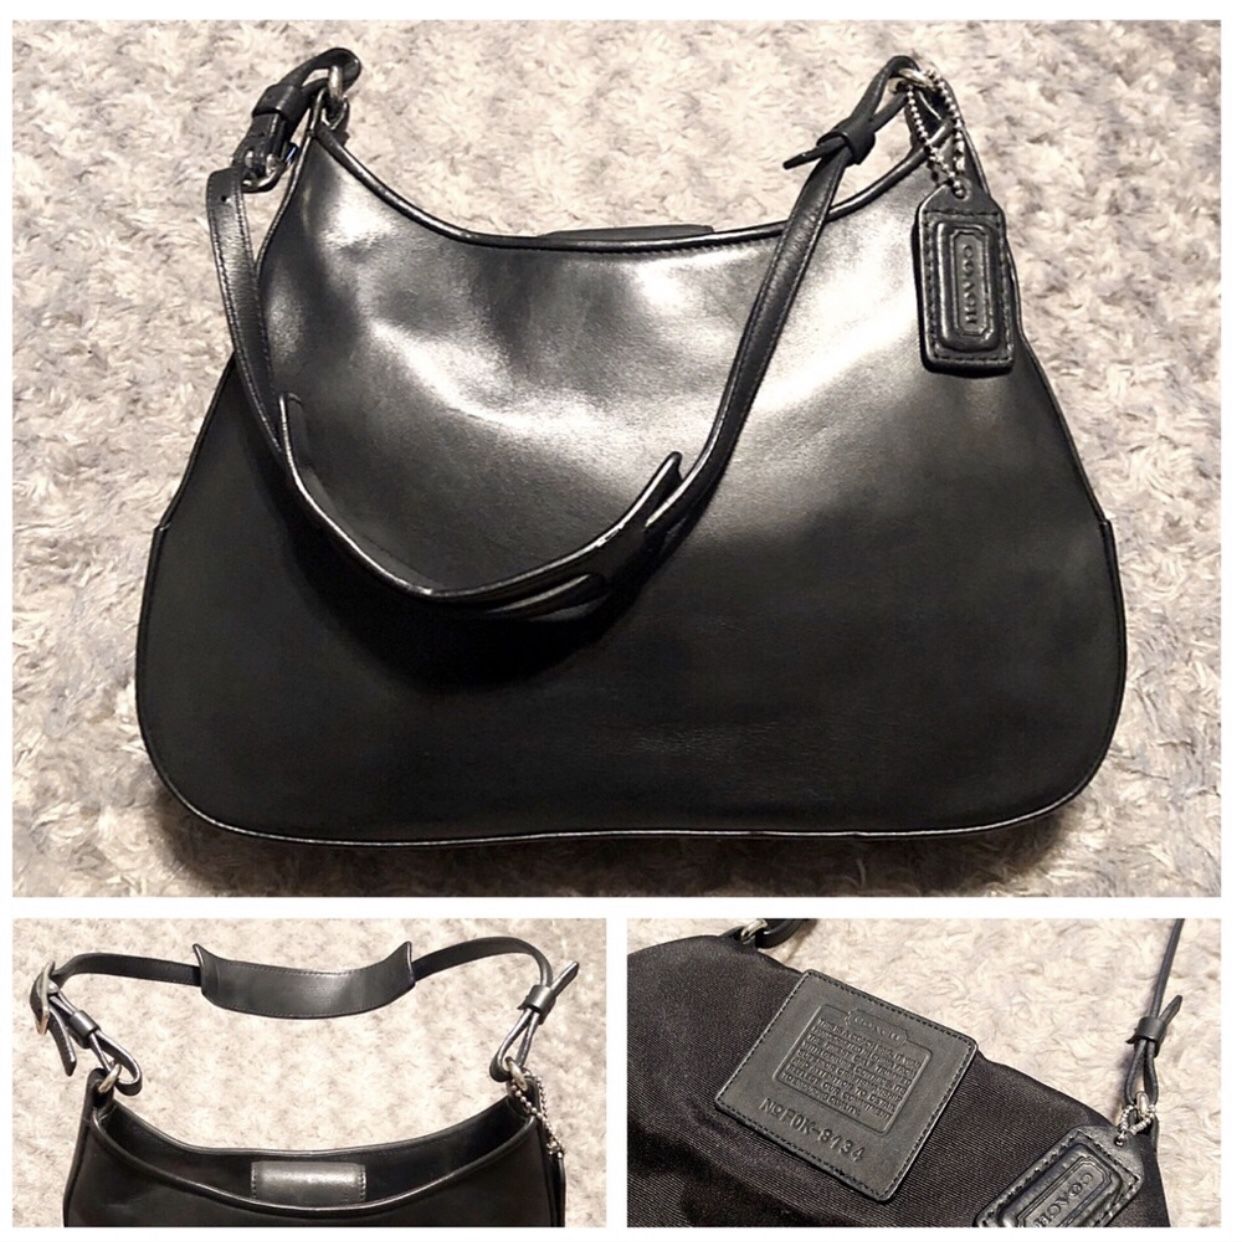 Coach Calf Skin Hobo paid $298 Like new! Shoulder Bag # FOK-8134 comes with dust bag! Excellent condition clean interior/exterior! Measurements: 10"